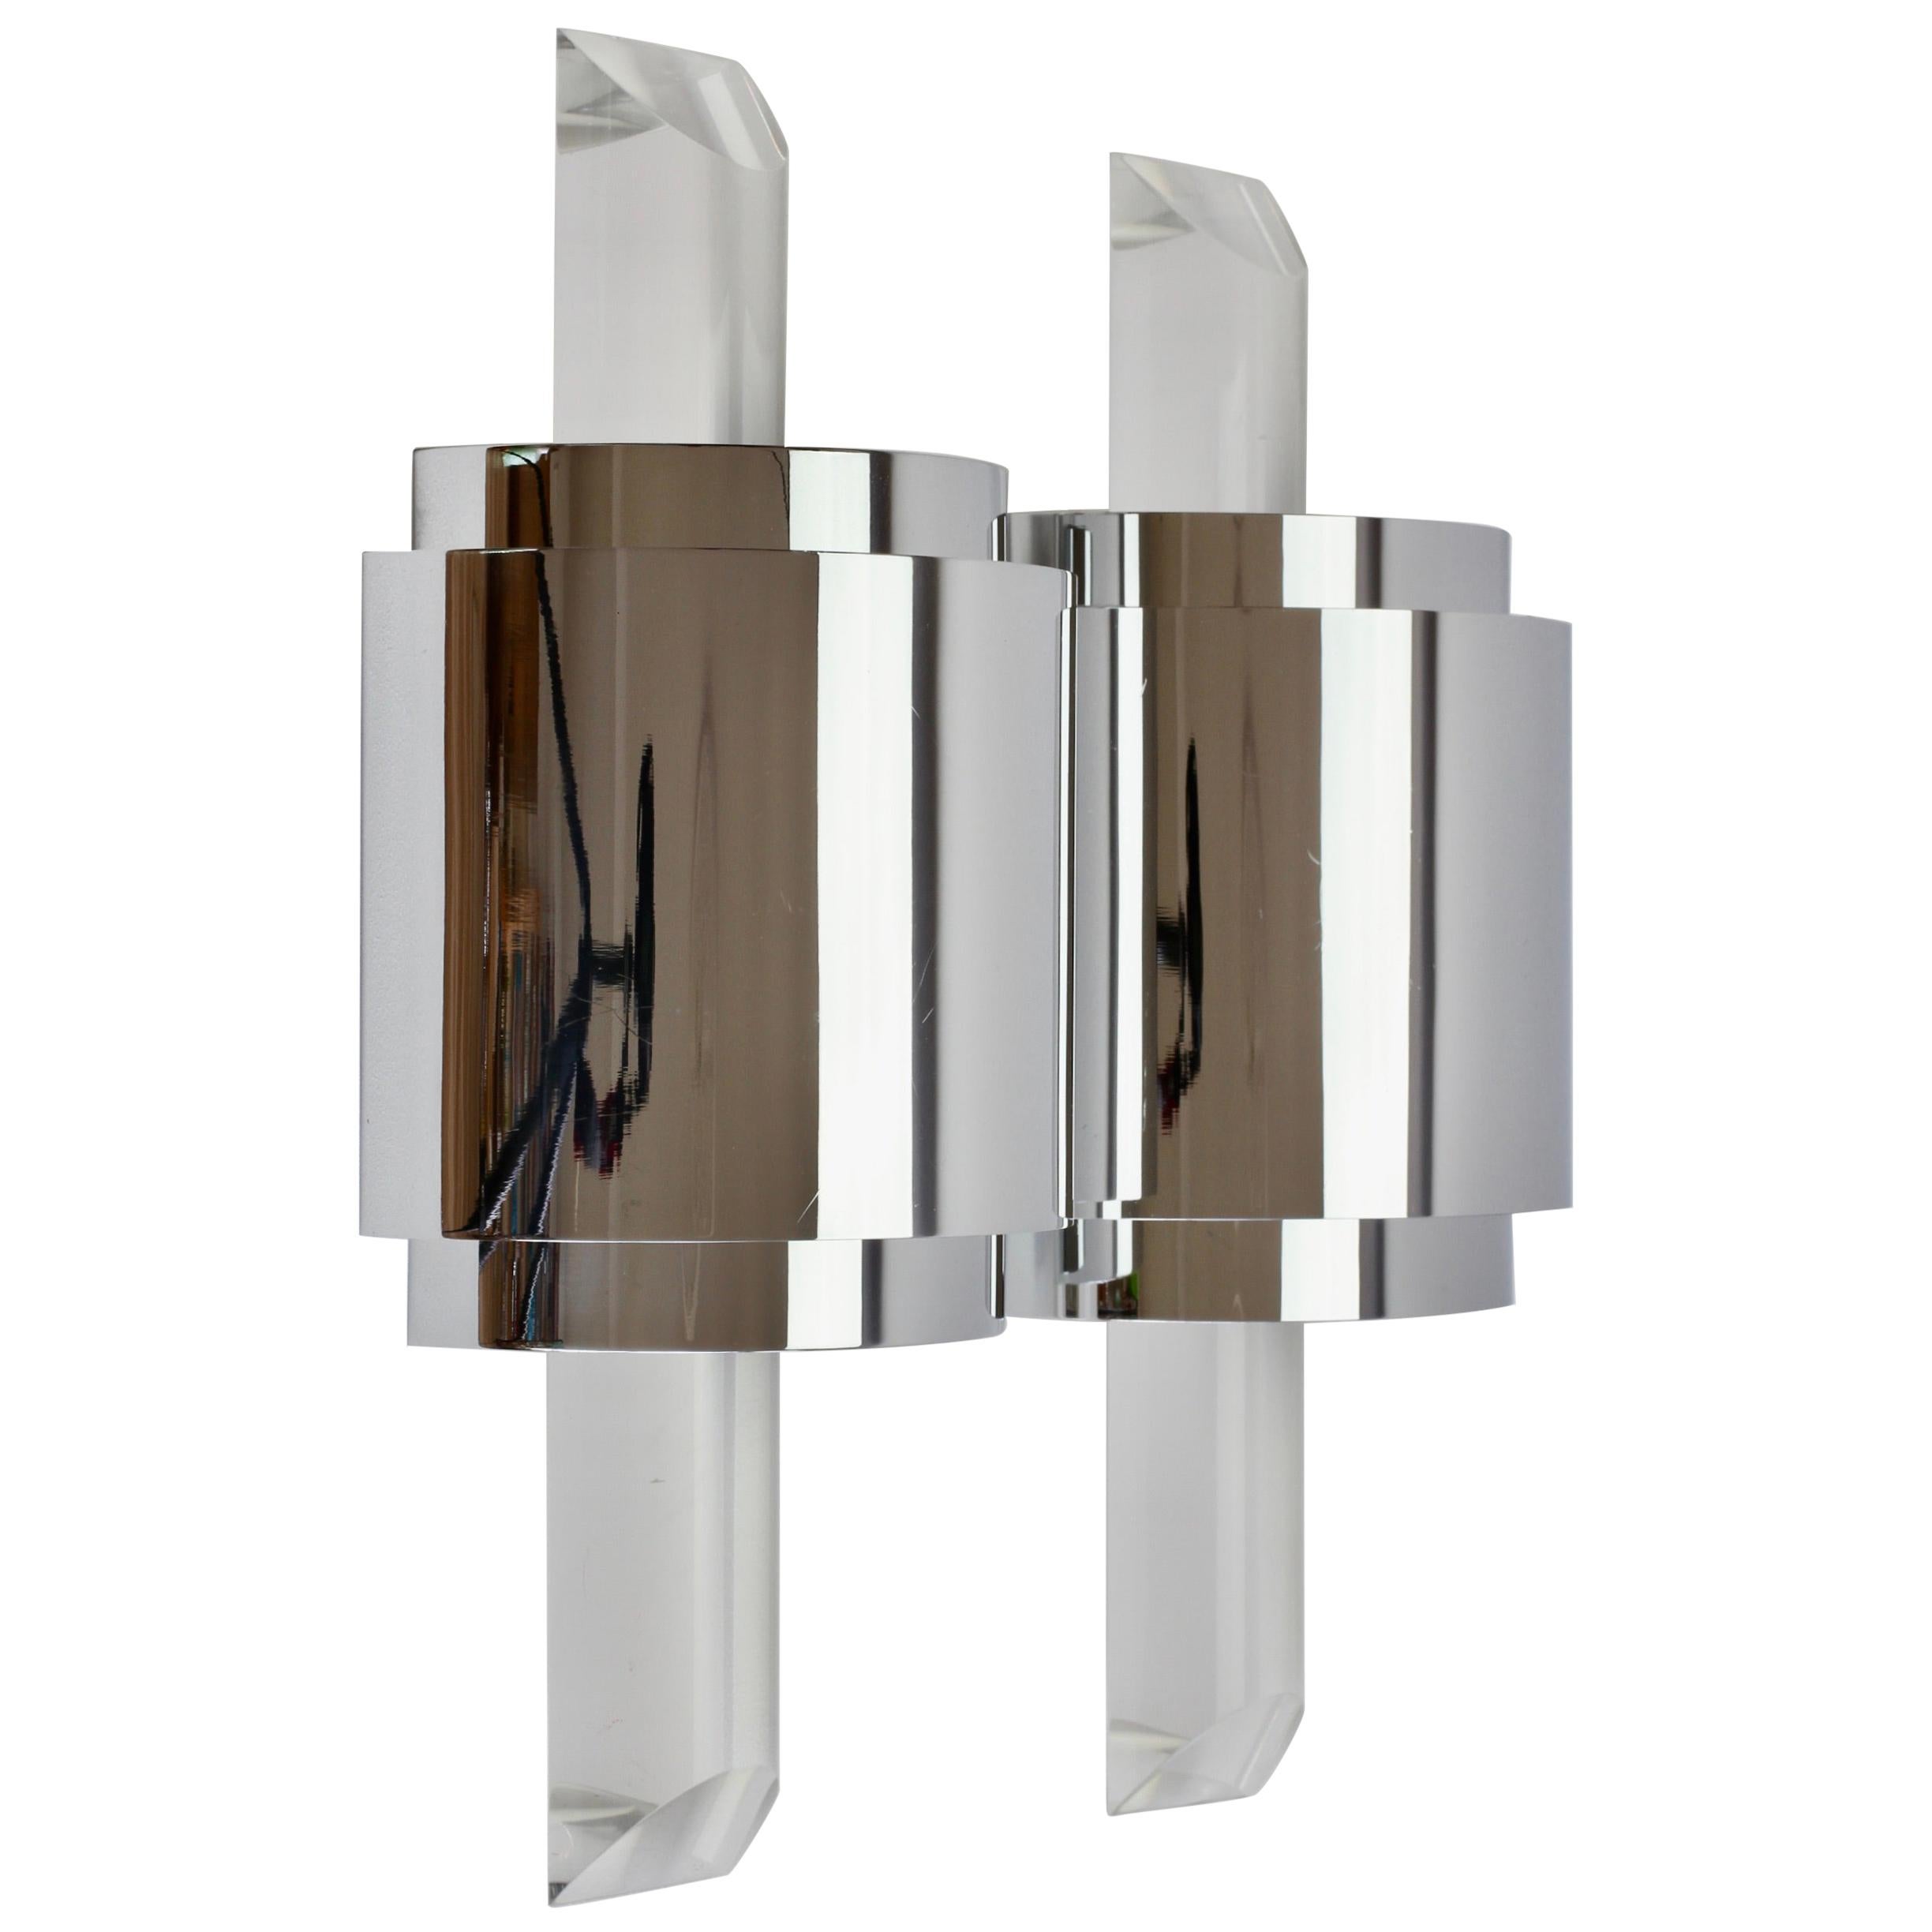 Italian 1 of 4 Large Vintage Hollywood Regency Lucite and Chrome Wall Lights or Sconces For Sale